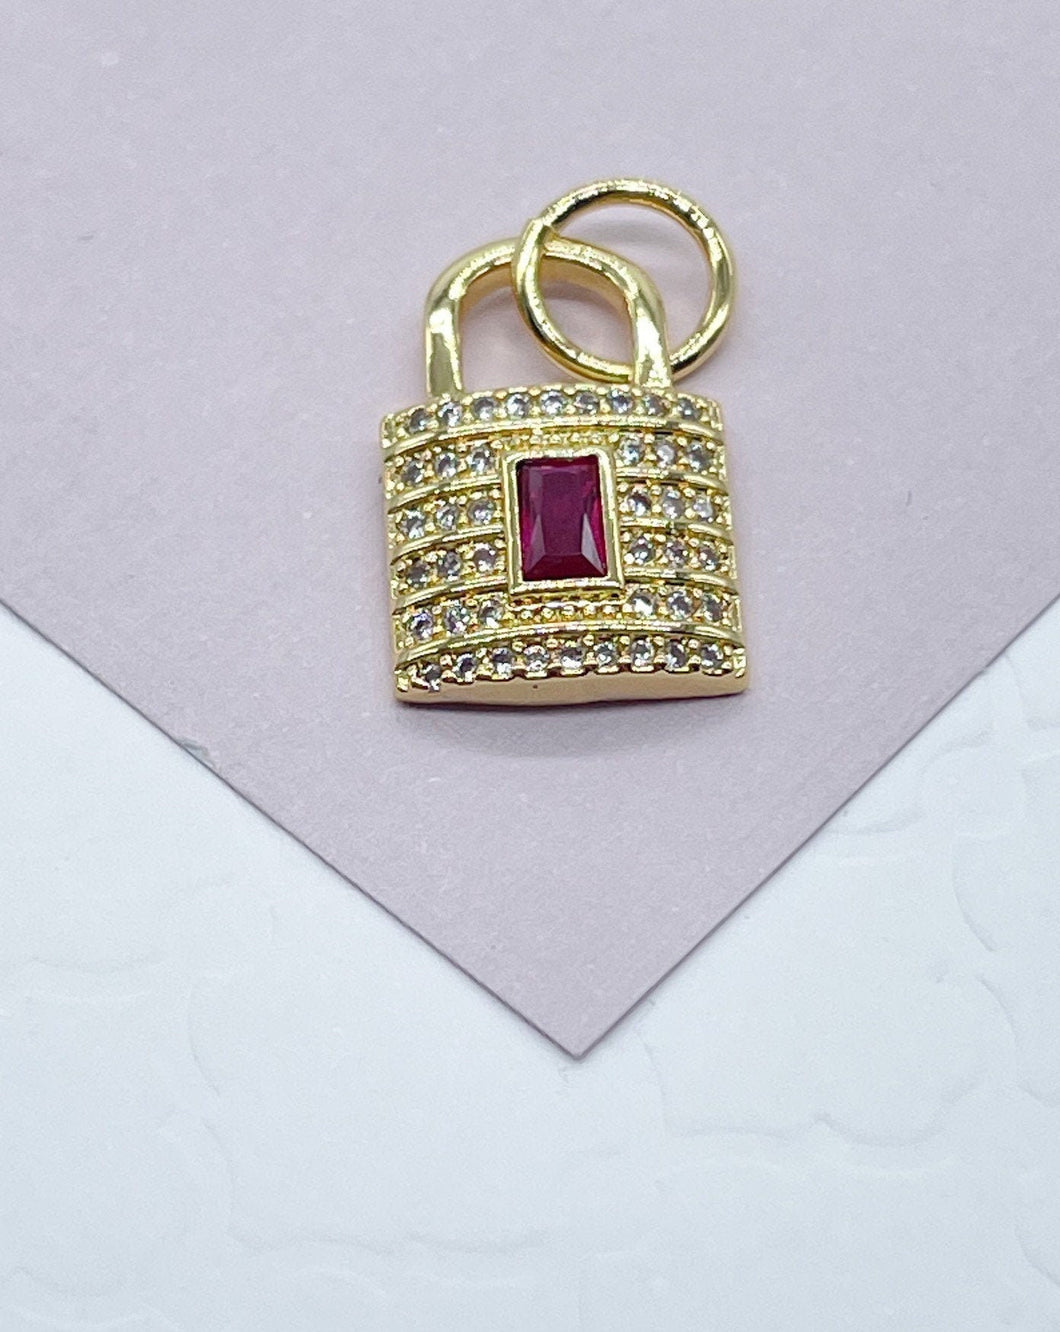 18k Gold Filled Lock Charm with Micro Pave Cubic Zirconia Featuring Dainty